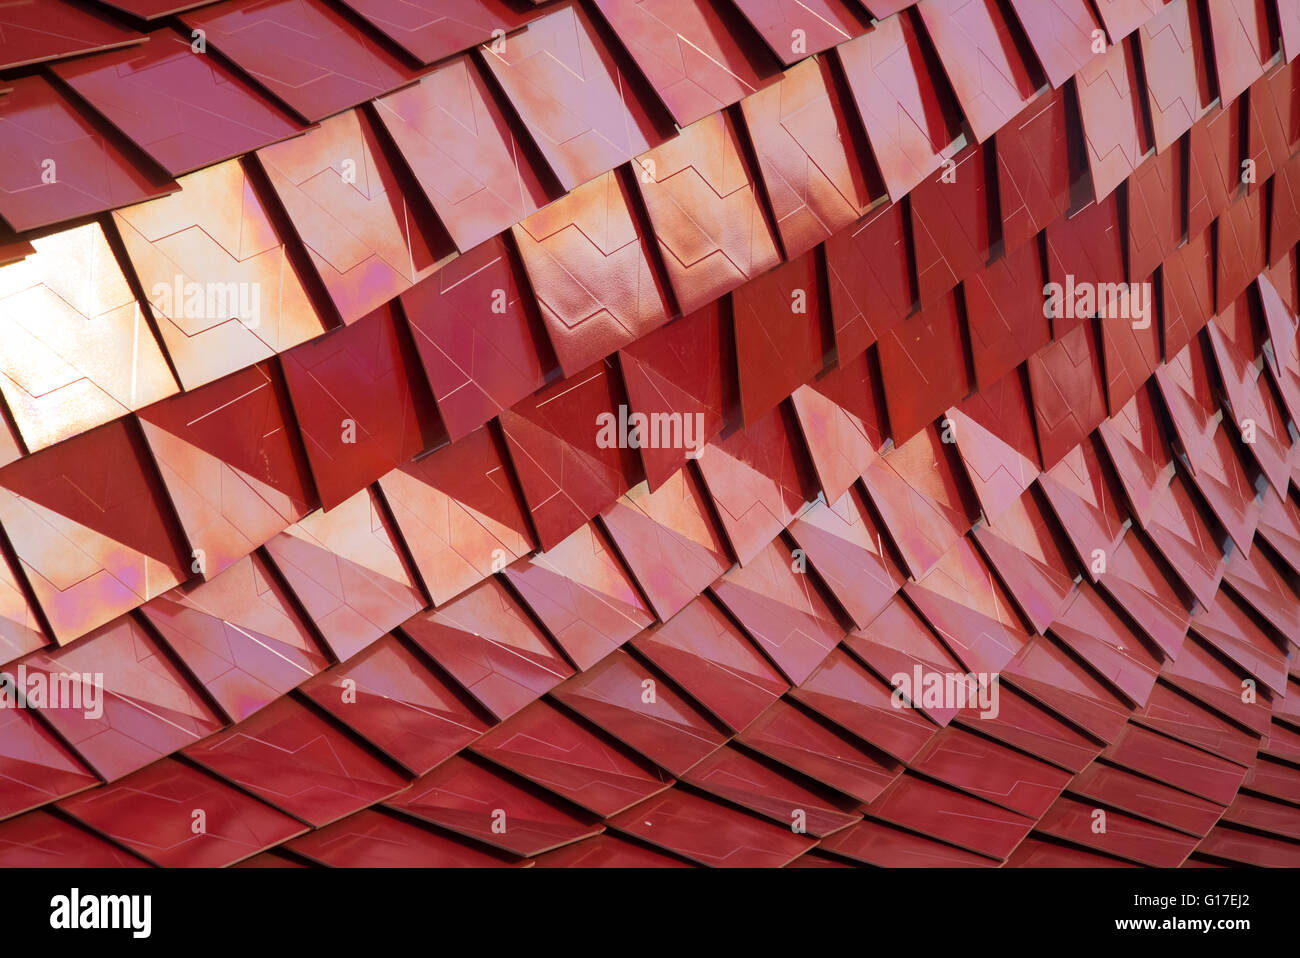 Abstract red architecture in modern city Stock Photo